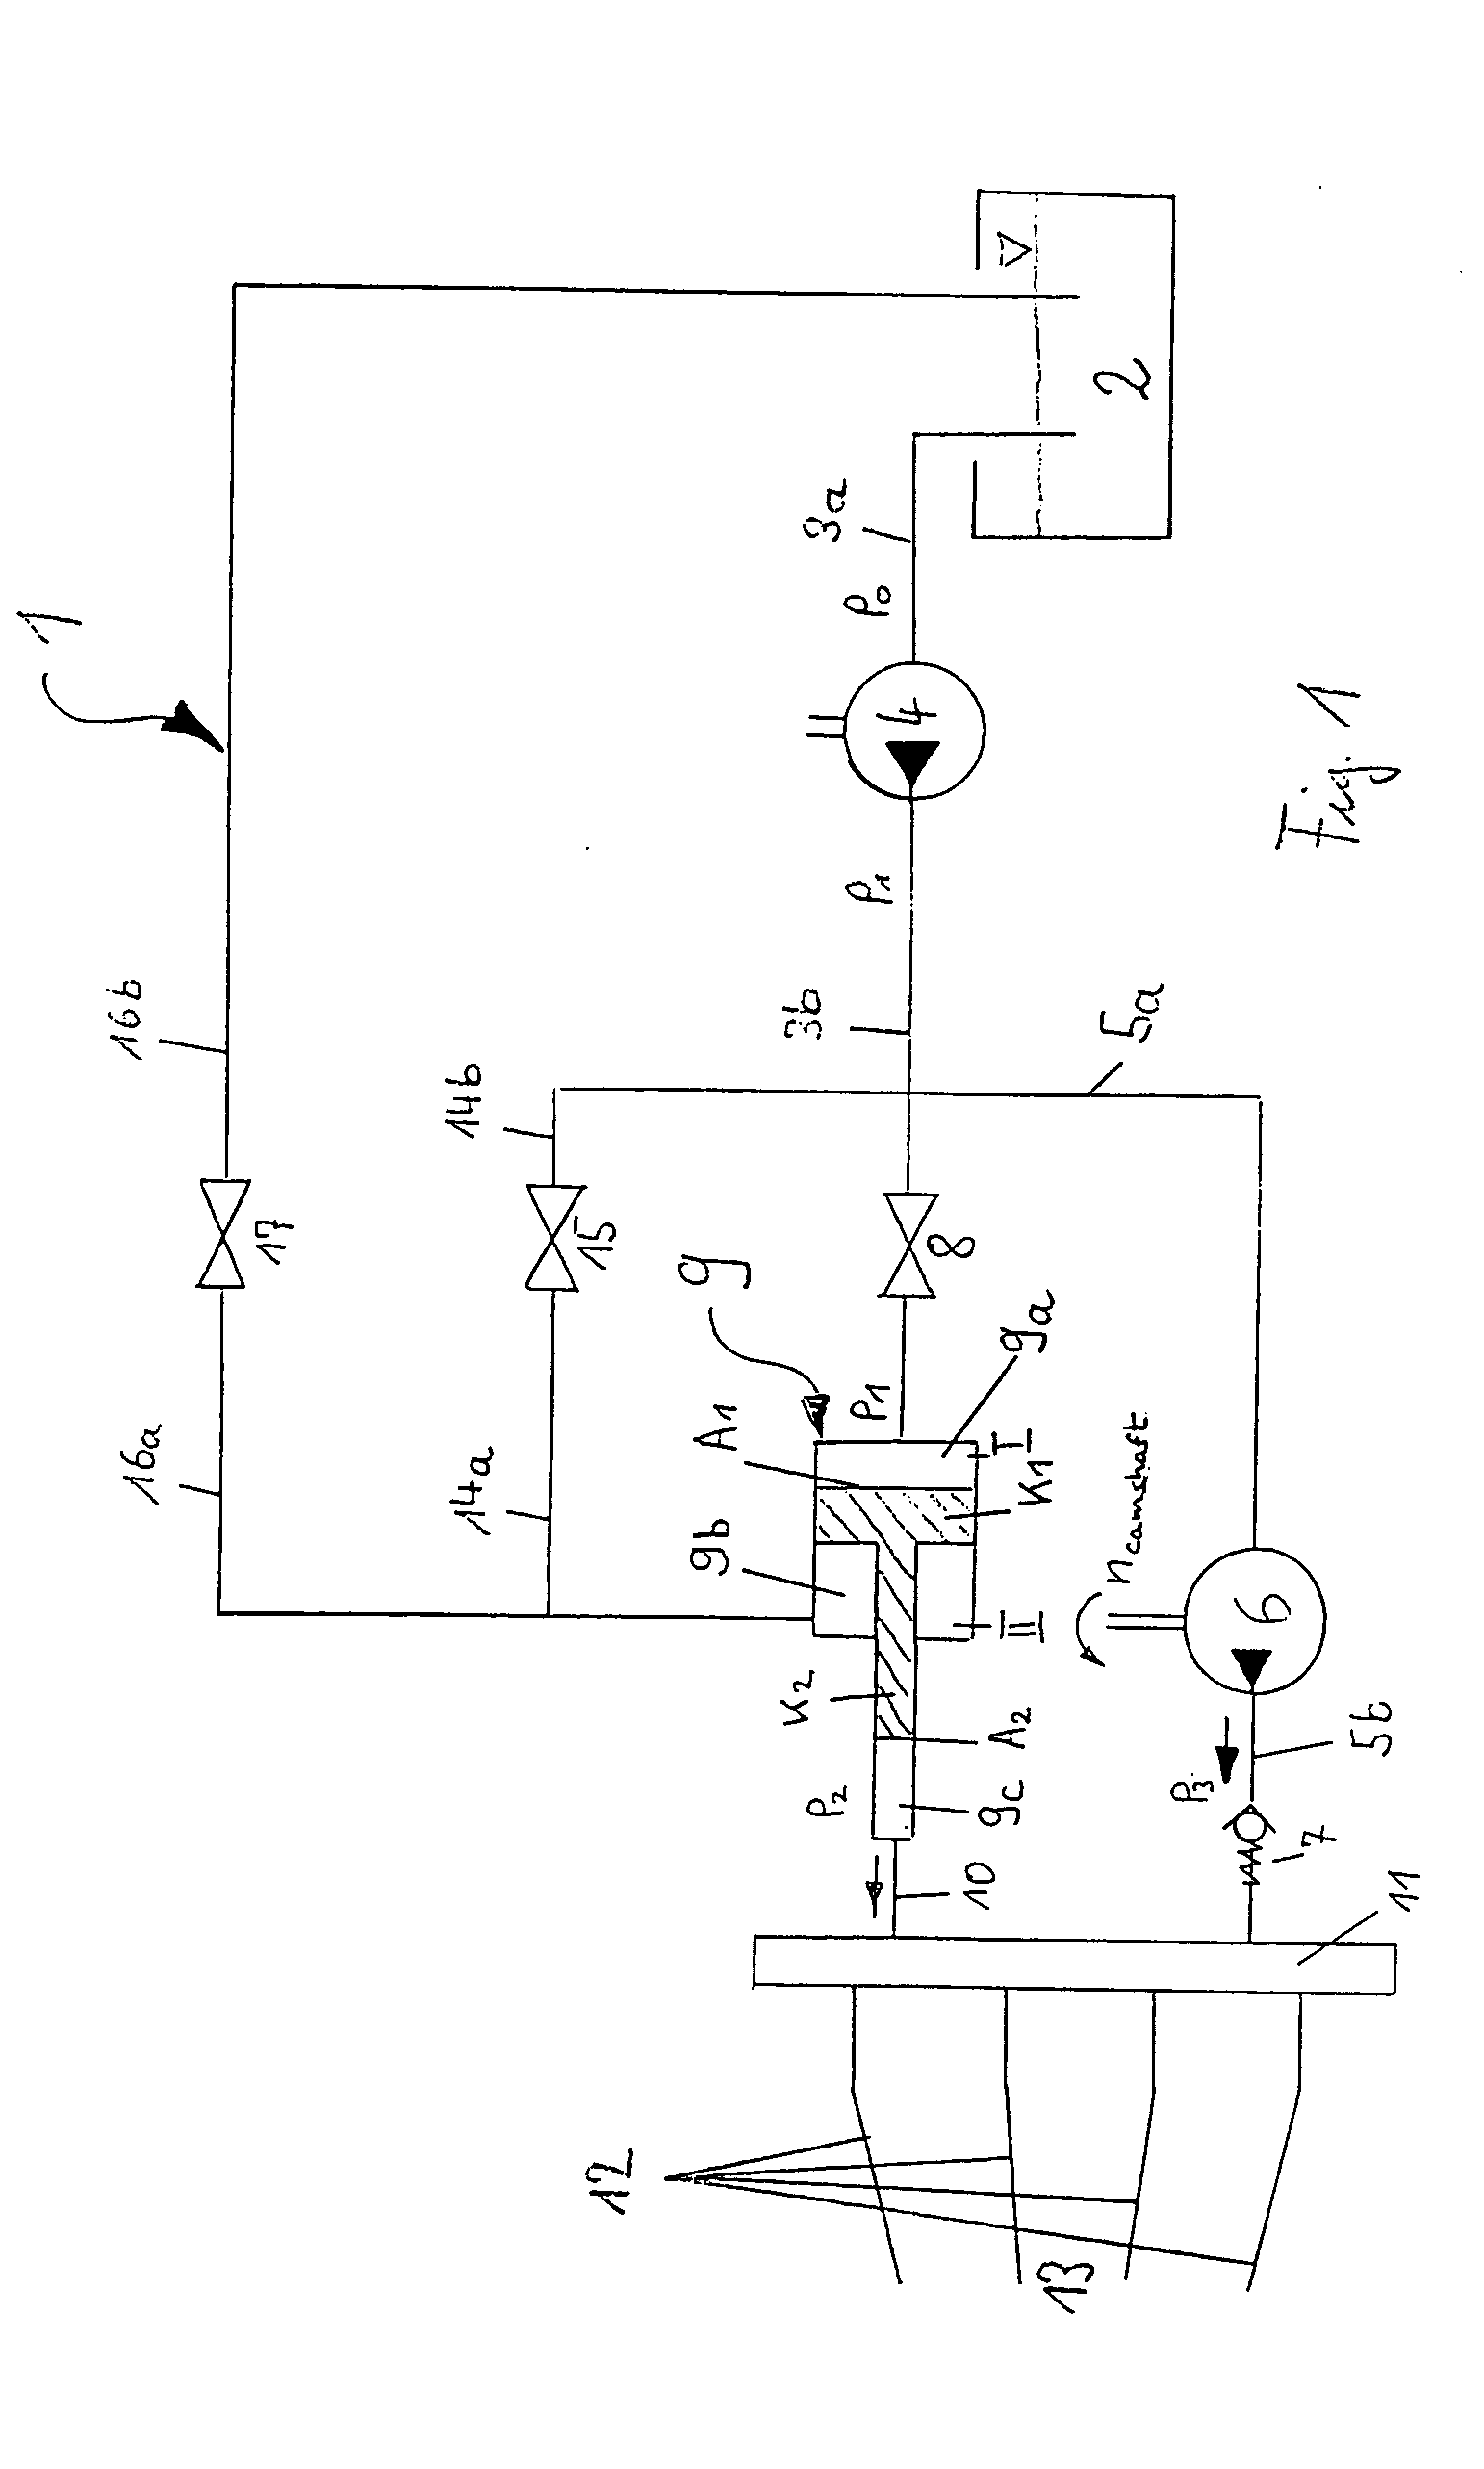 Fuel supply system for internal combustion engine with direct fuel injection